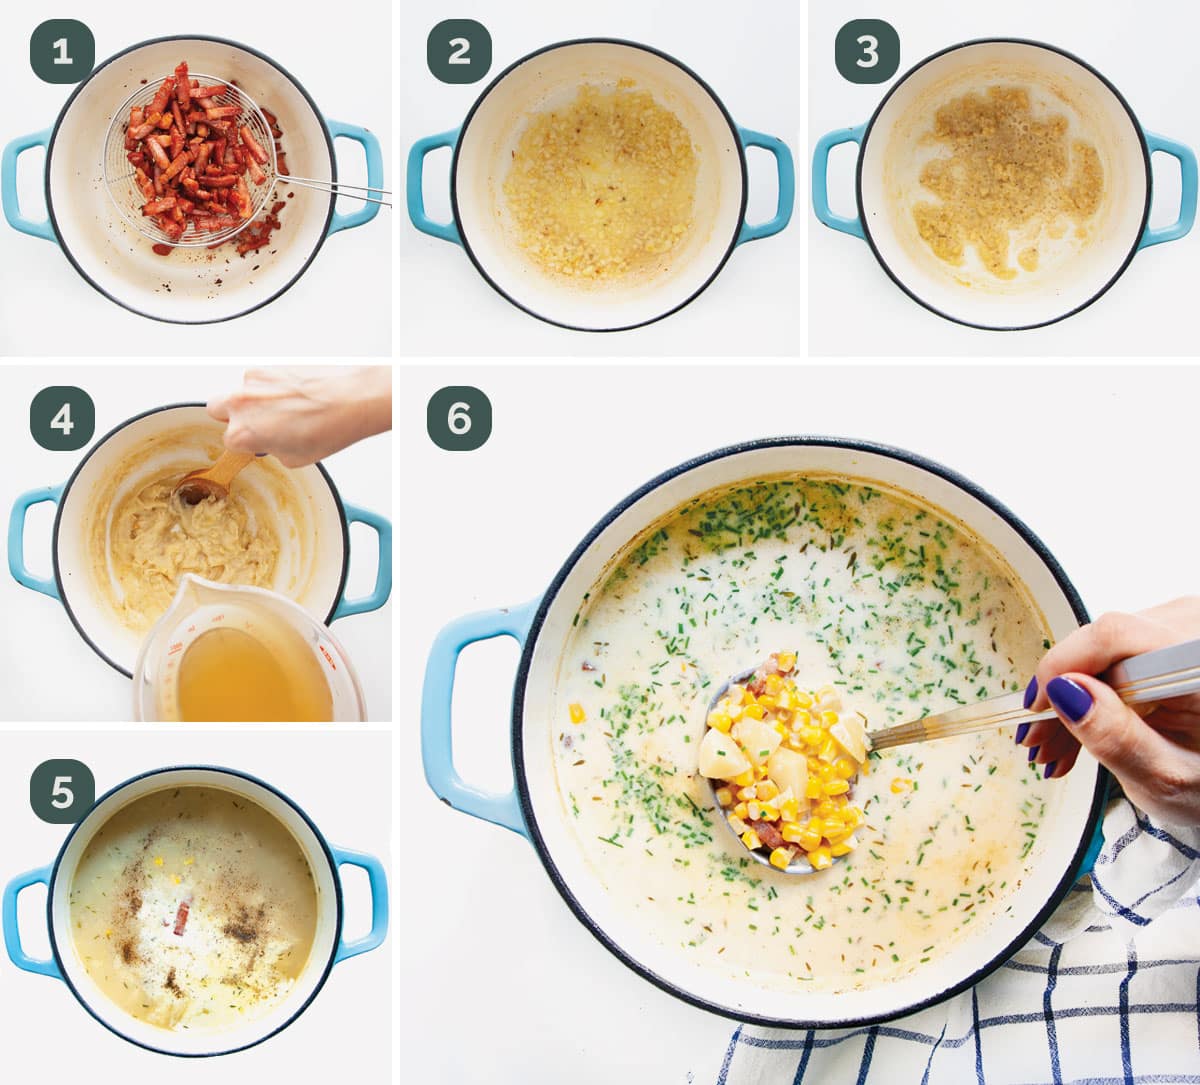 detailed process shots showing how to make corn chowder.